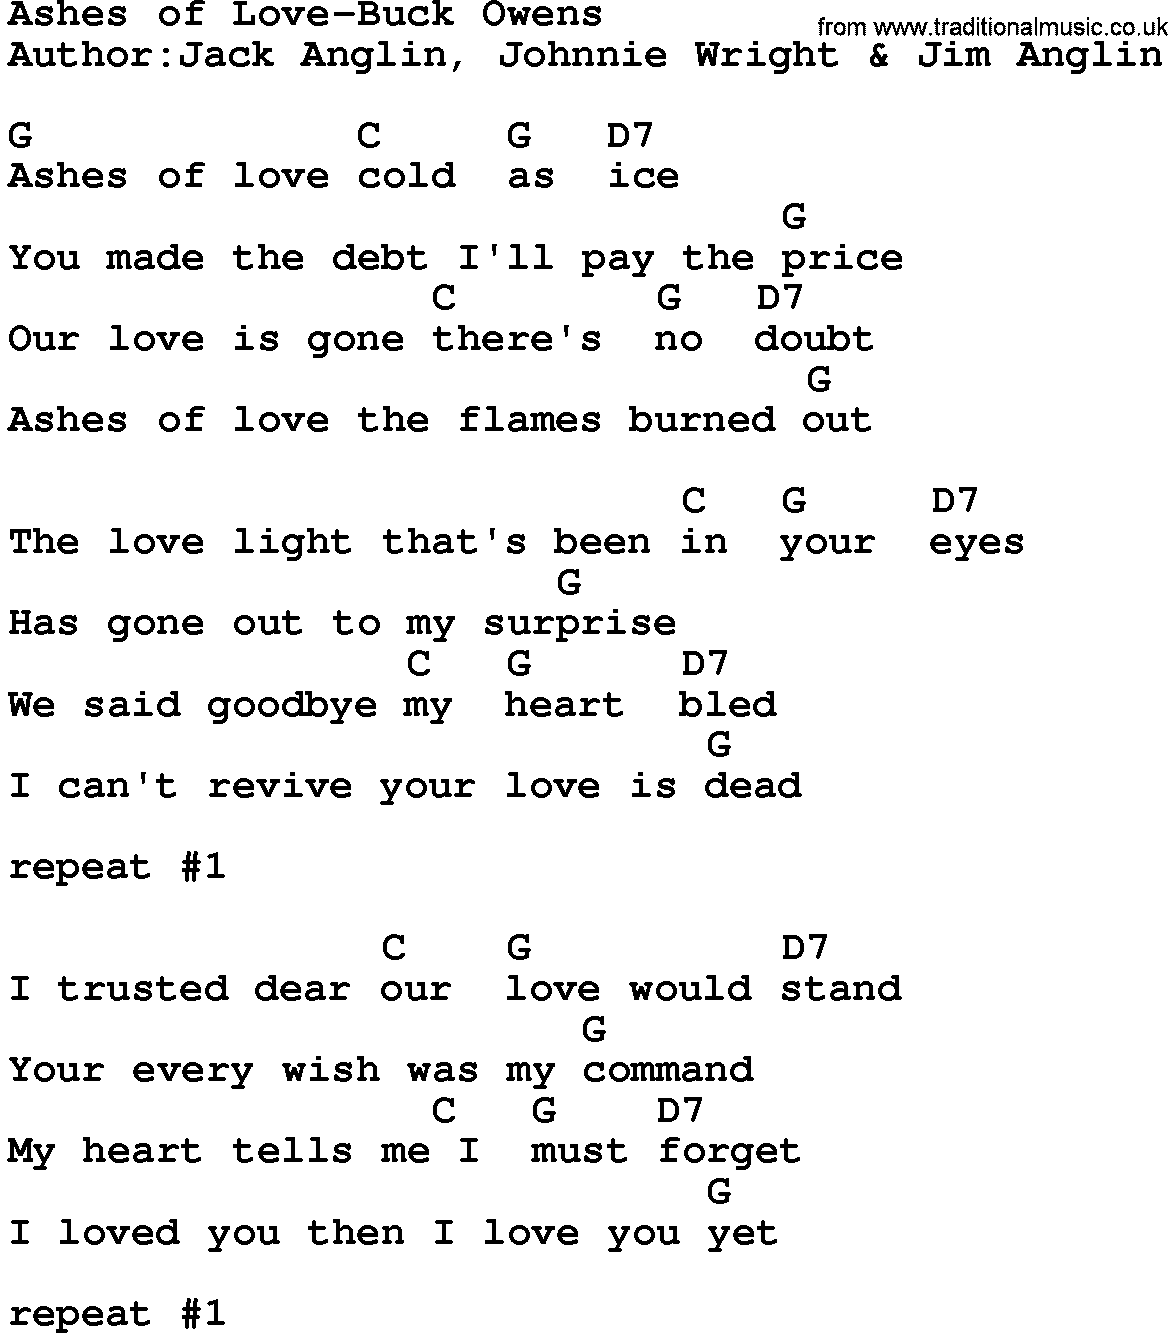 Country music song: Ashes Of Love-Buck Owens lyrics and chords